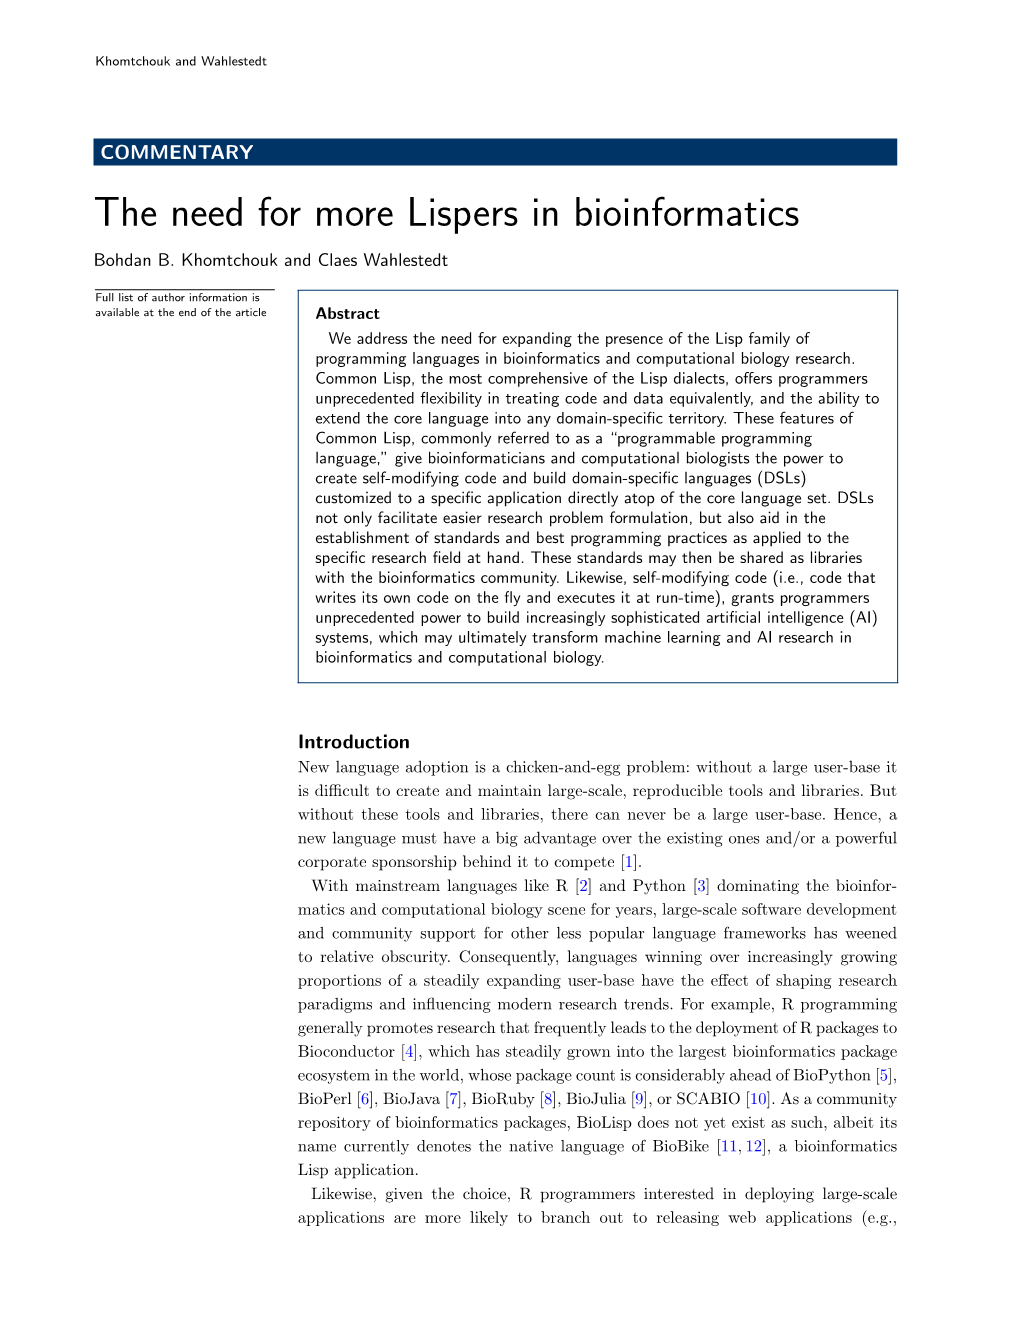 The Need for More Lispers in Bioinformatics Bohdan B